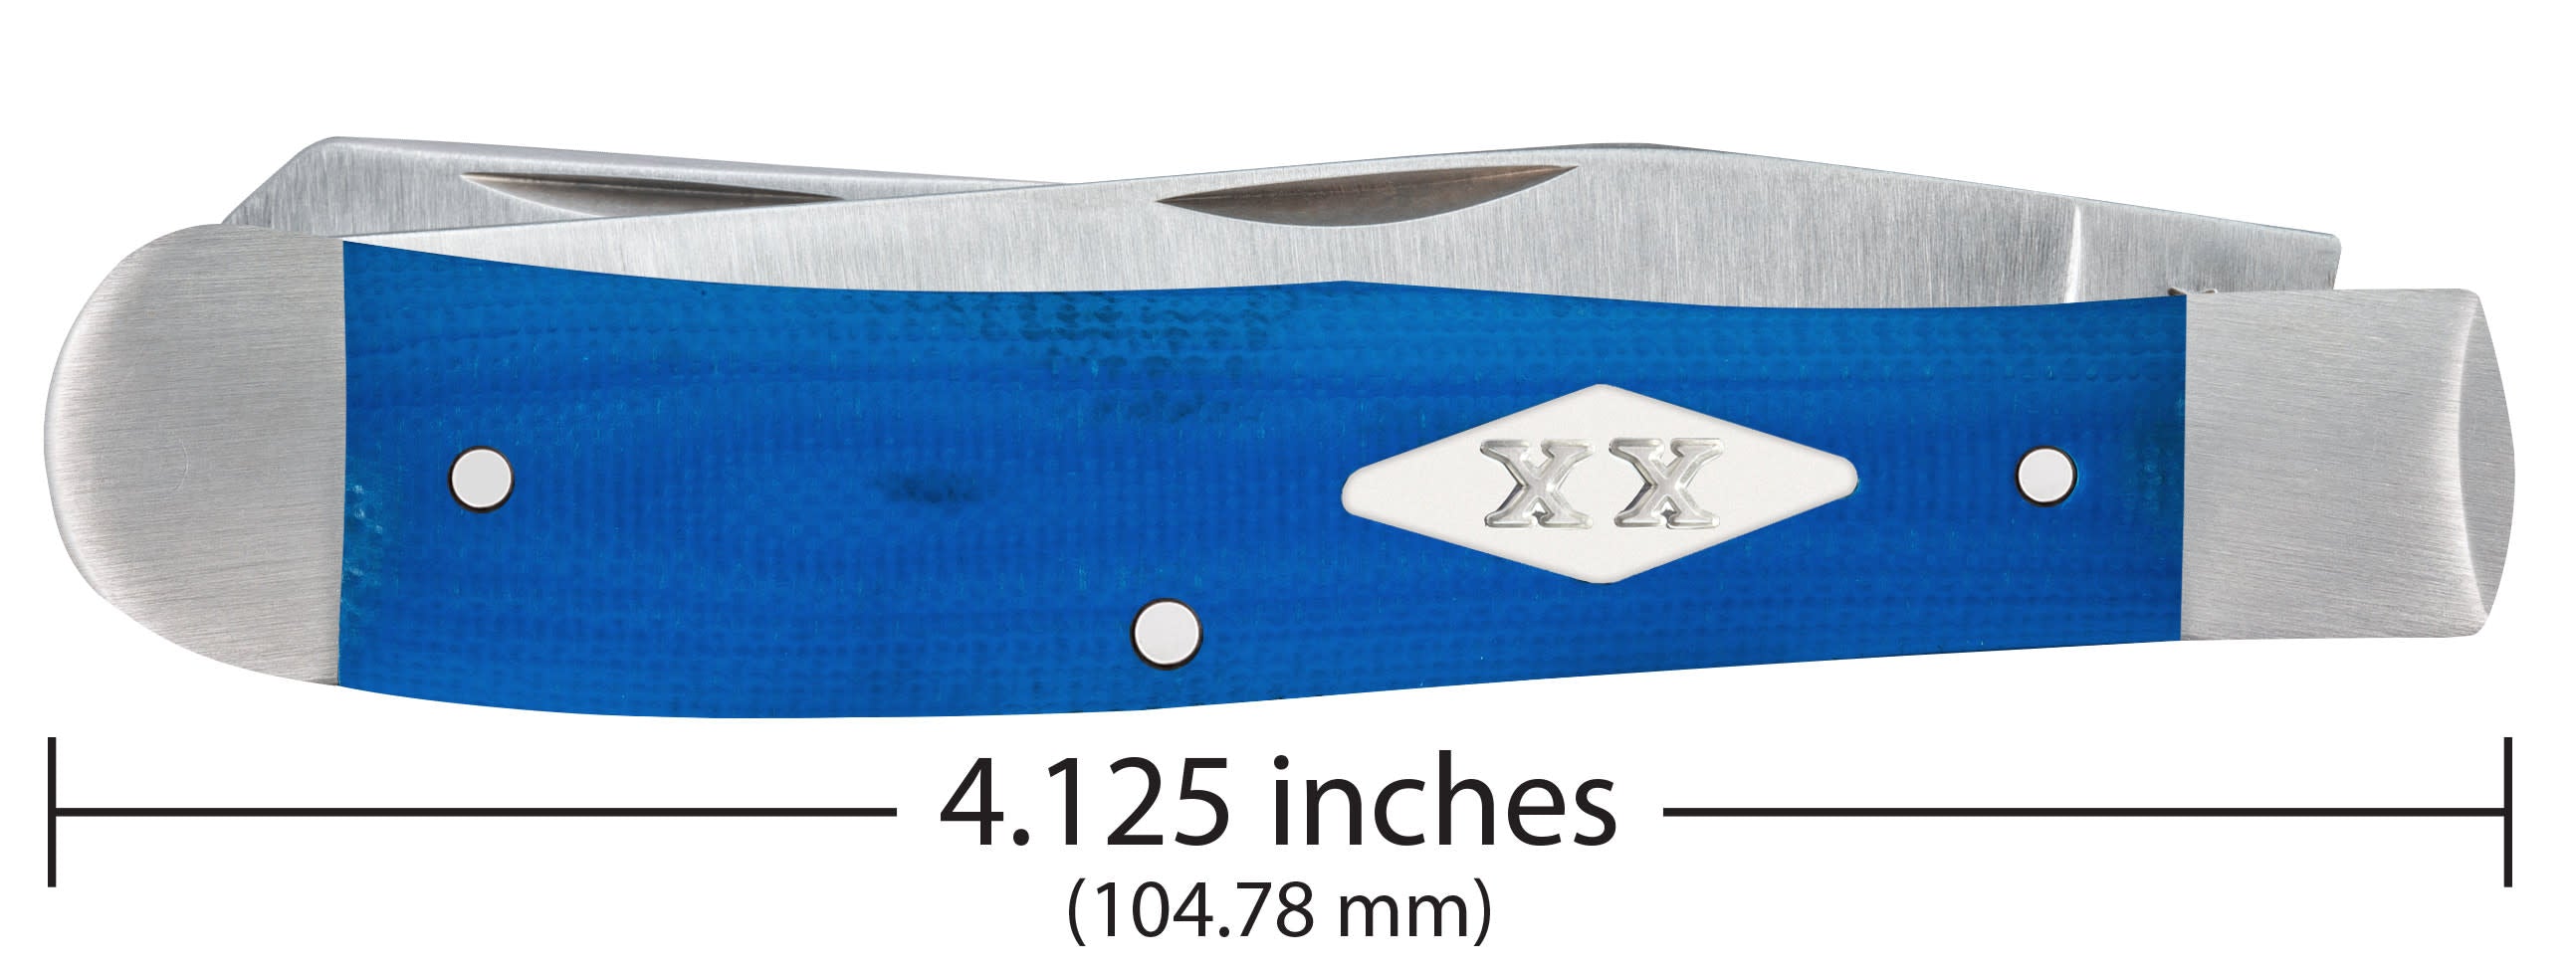 Smooth Blue G-10  Trapper  Knife Dimensions